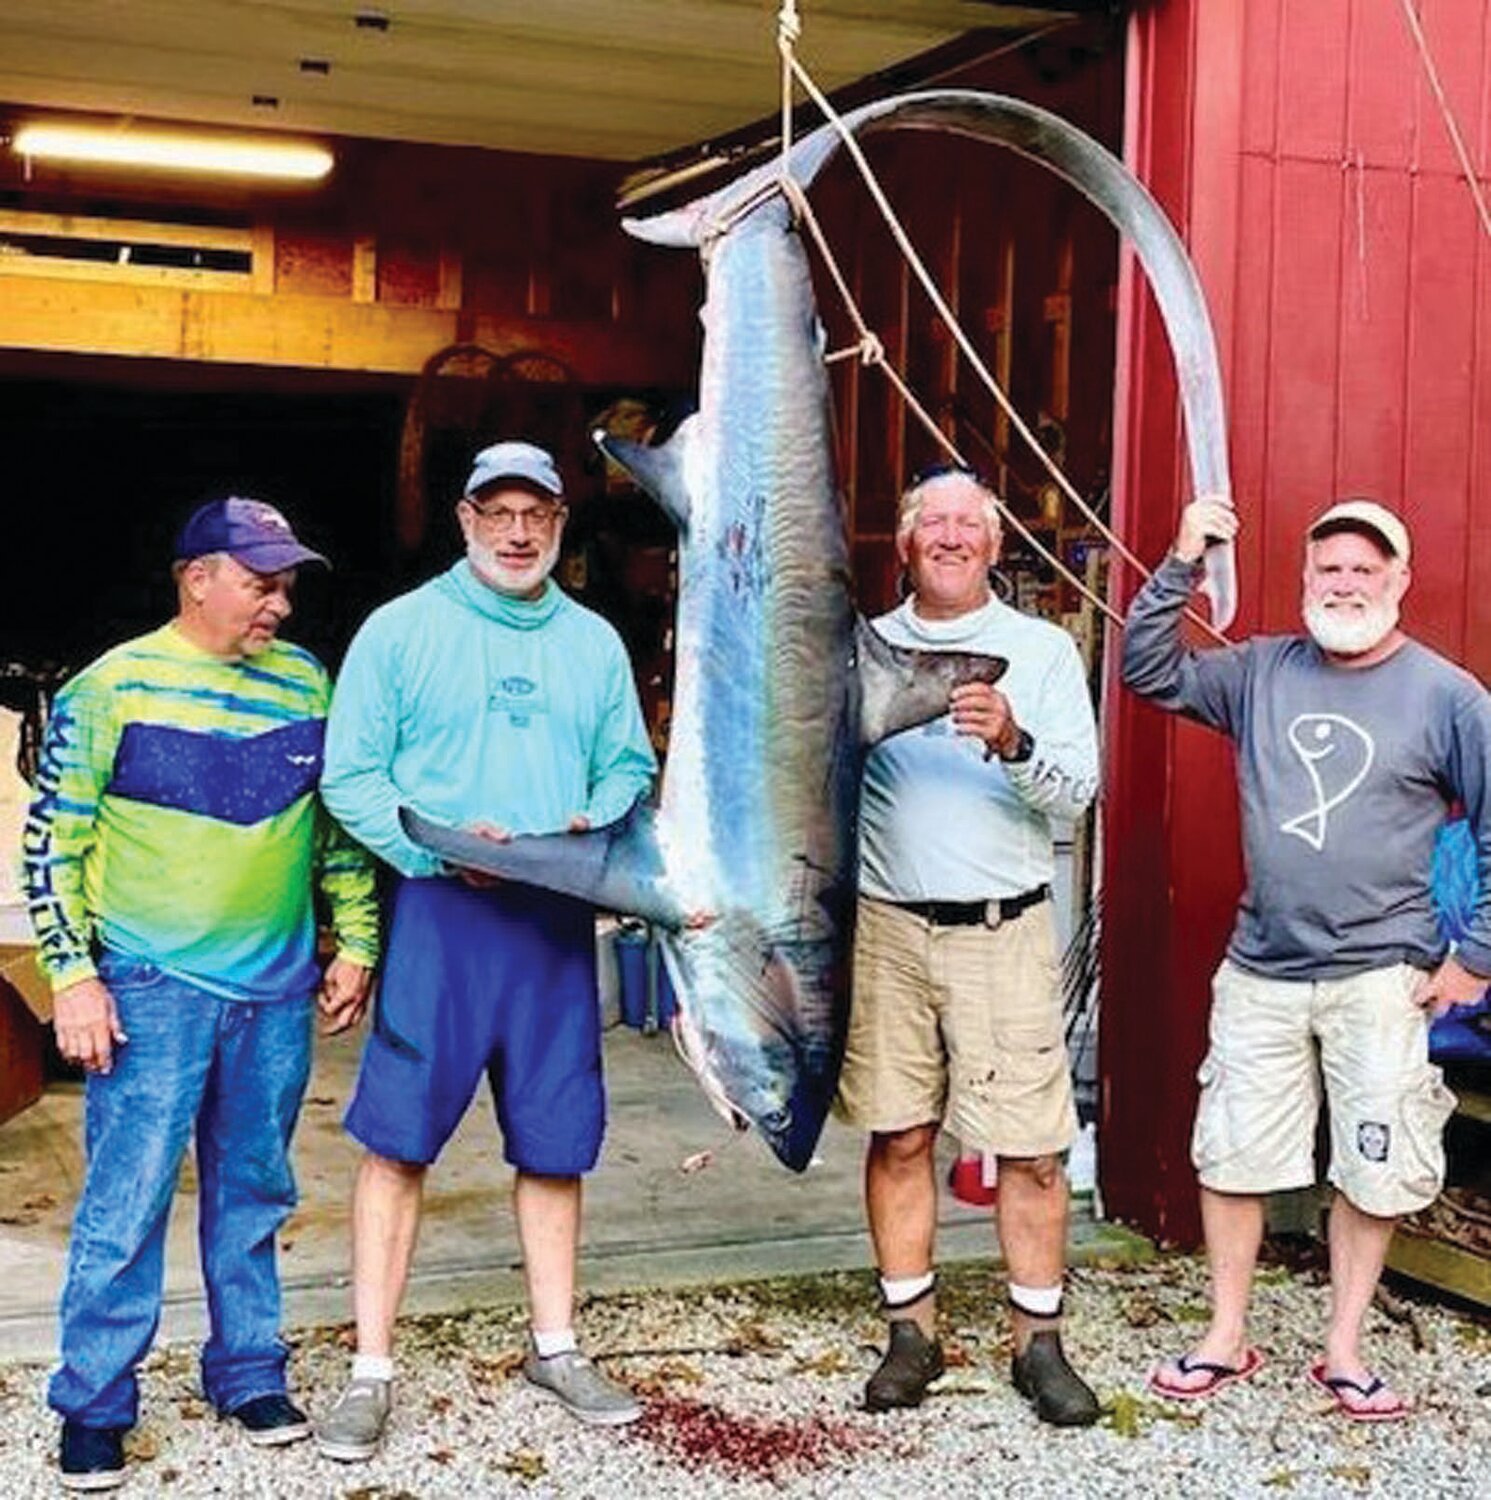 SHARK BITE: Dave Dube, Greg Vespe, Phil Duckett Jr. and Todd Corayer caught this 11-foot, 4-inch thresher shark when fishing southeast of Newport last summer. (Submitted photos)